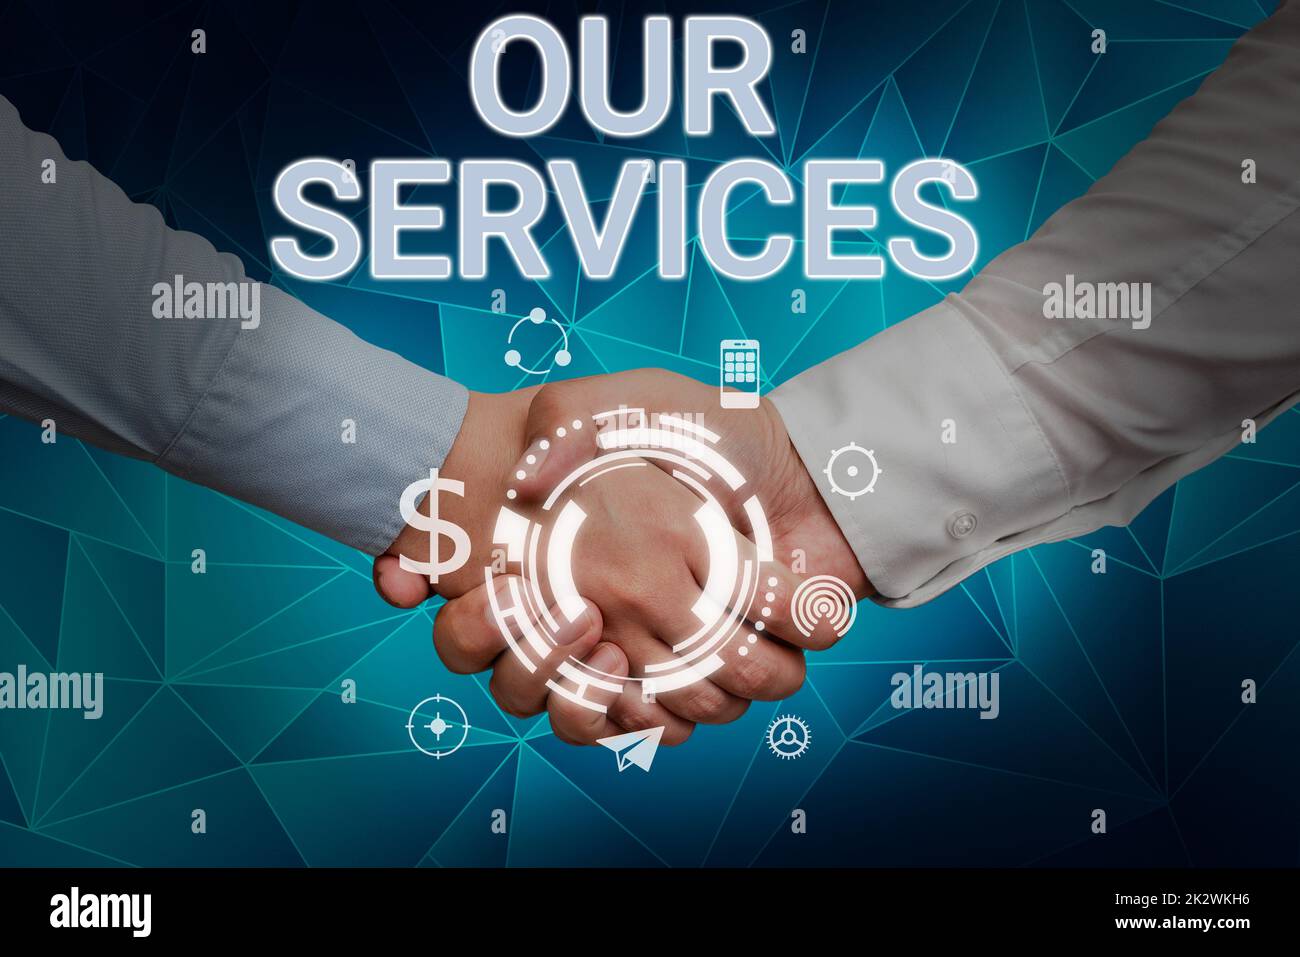 Writing displaying text Our Services. Word for The occupation or function of serving Intangible products Hands shaking presenting innovative plan ideas symbolizing teamwork. Stock Photo